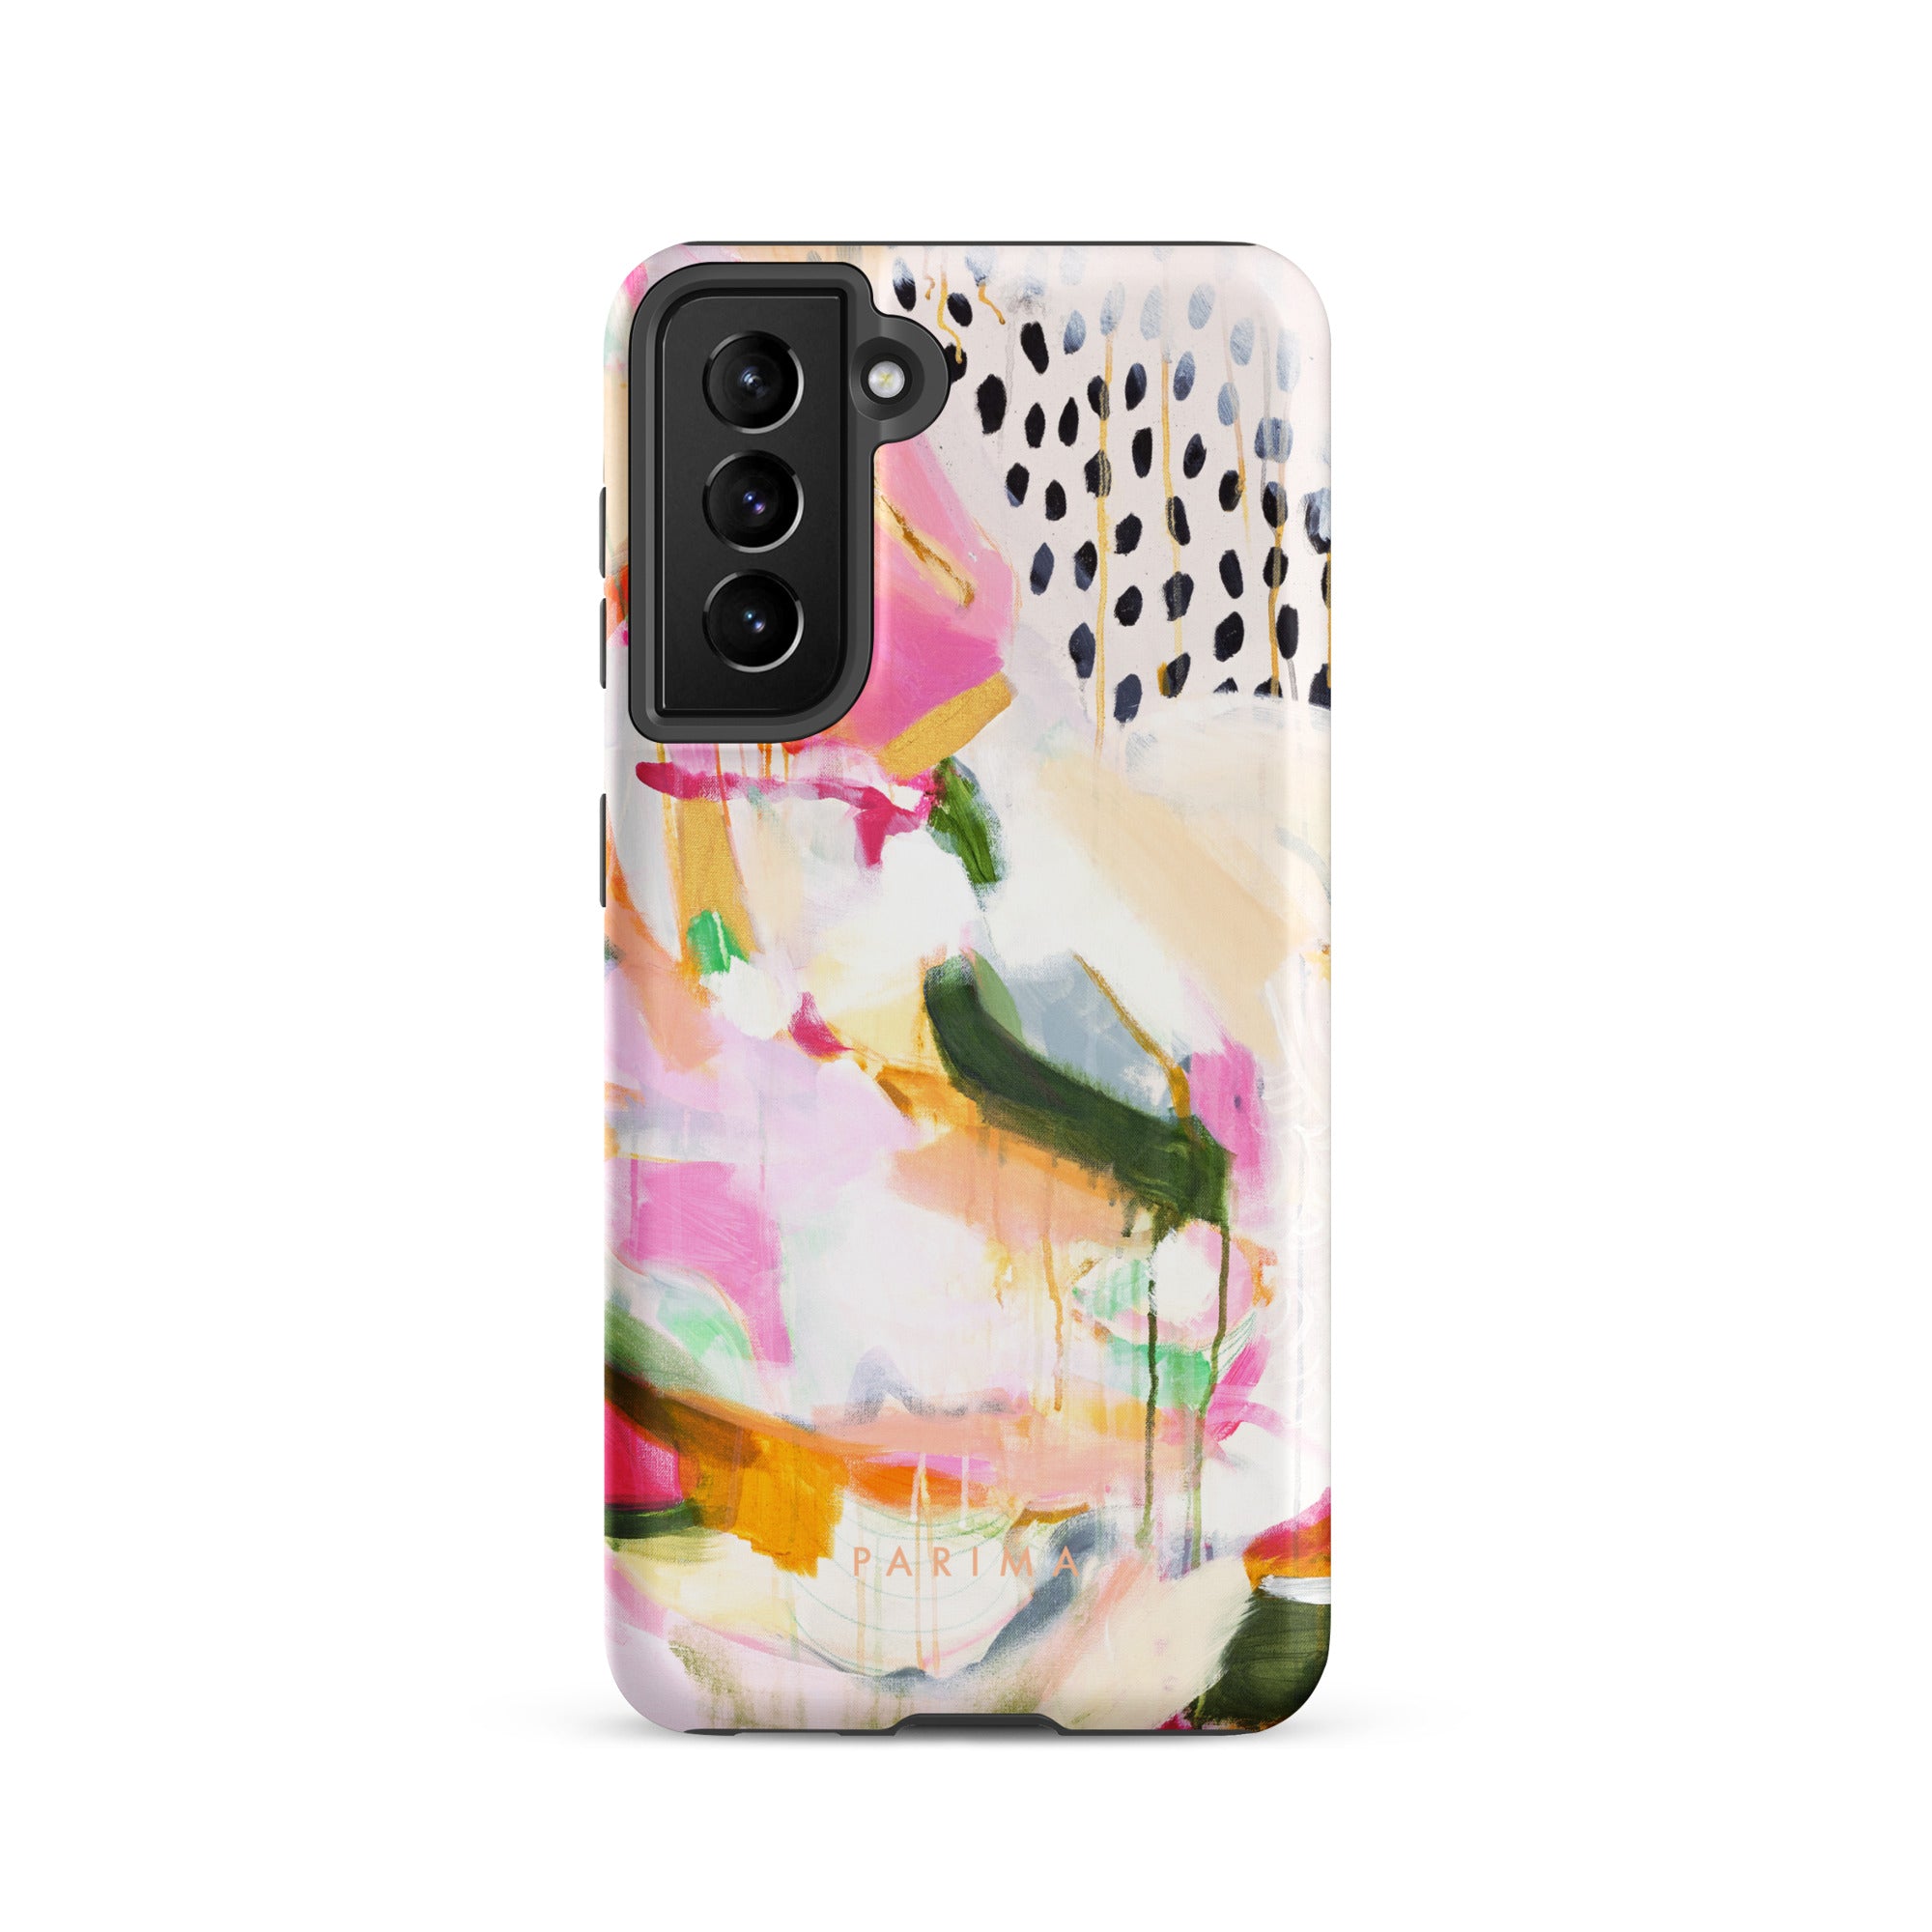 Adira, pink and green abstract art on Samsung Galaxy S21 tough case by Parima Studio